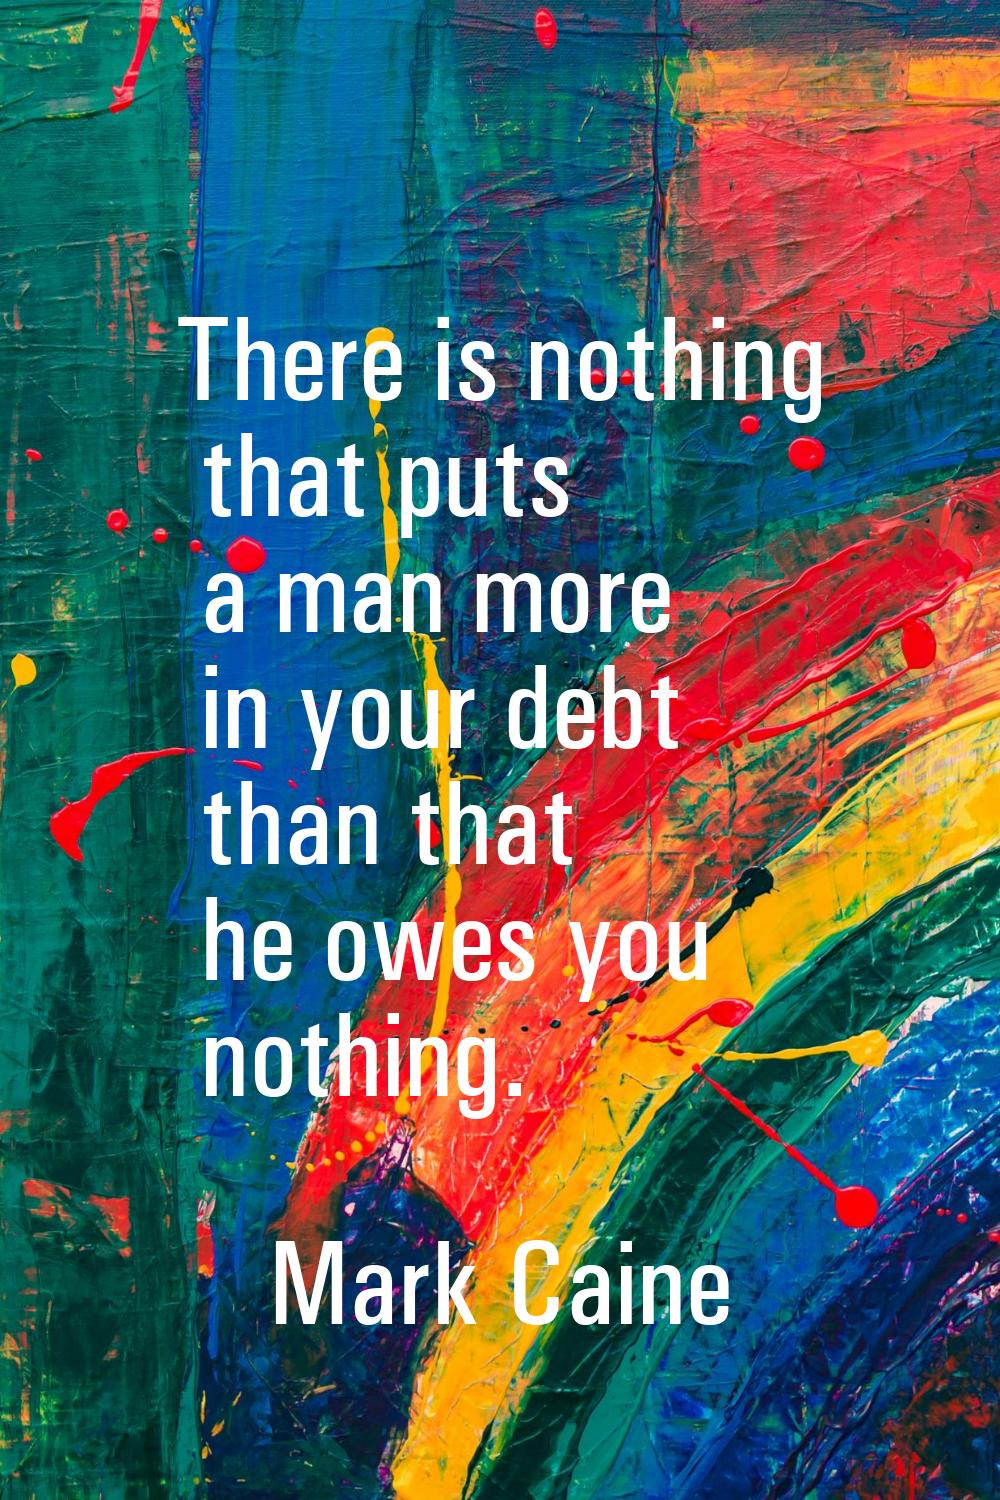 There is nothing that puts a man more in your debt than that he owes you nothing.